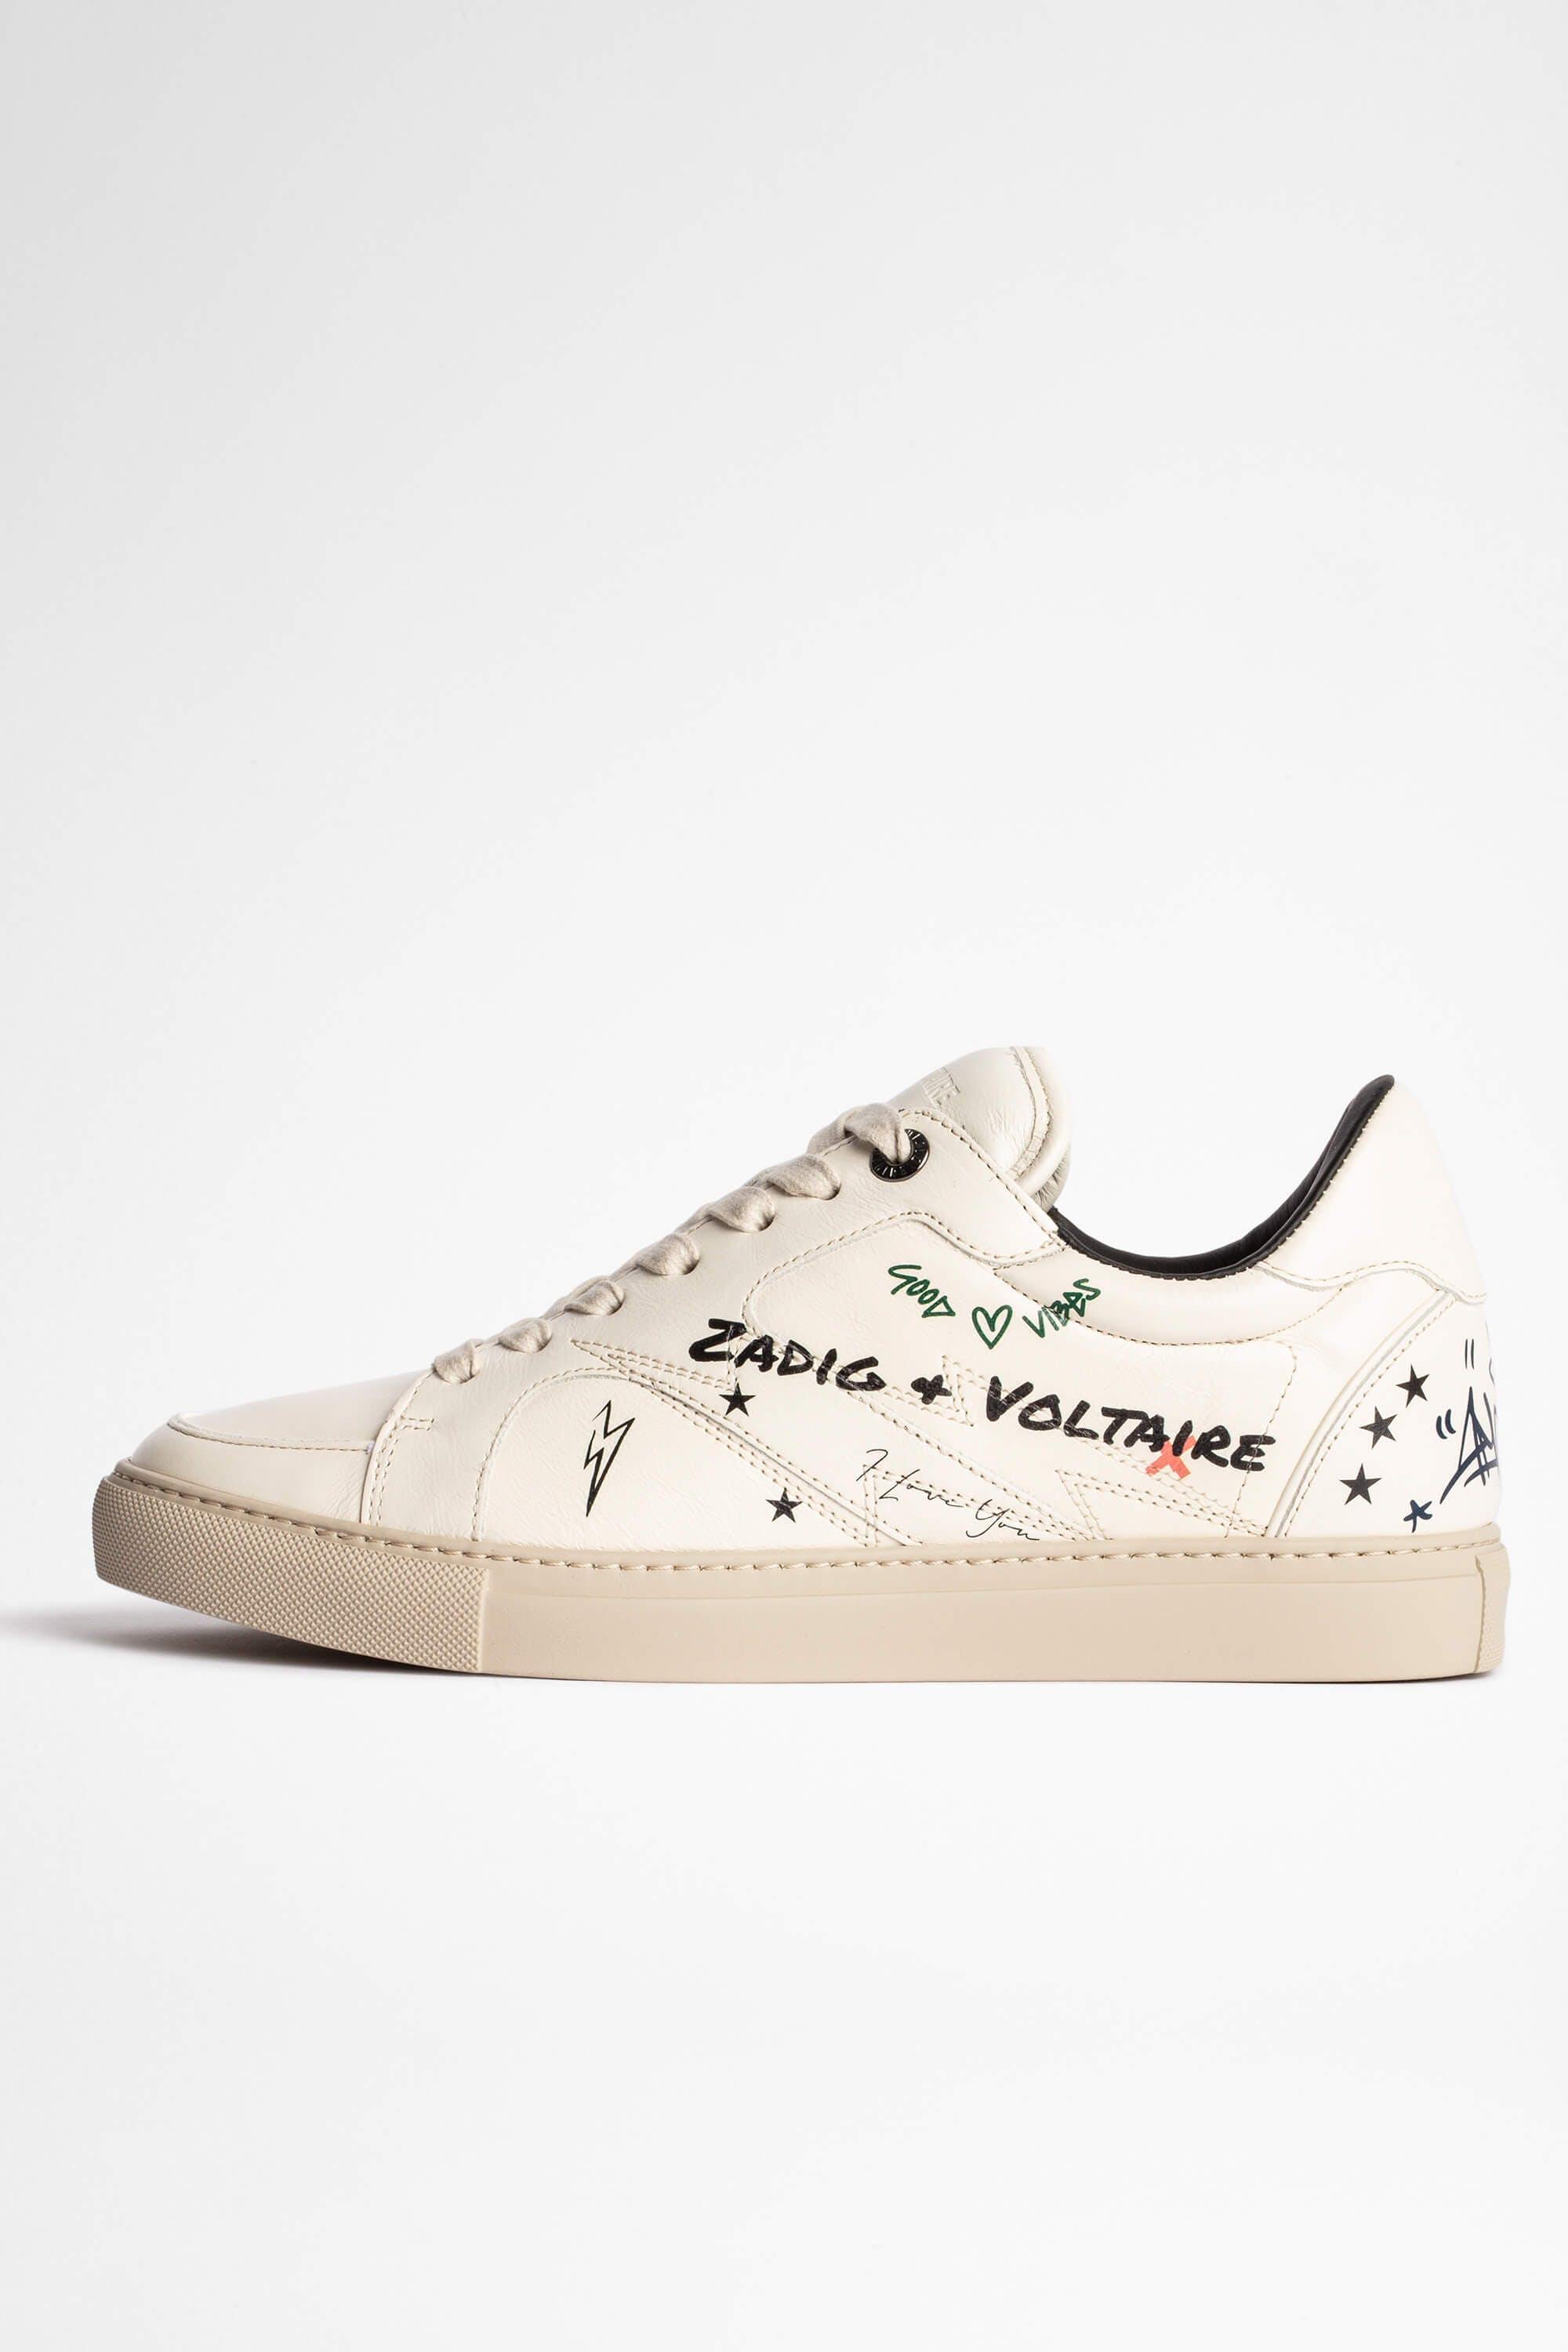 Voltaire Zv1747 Board Crush Sneakers Leather in White |